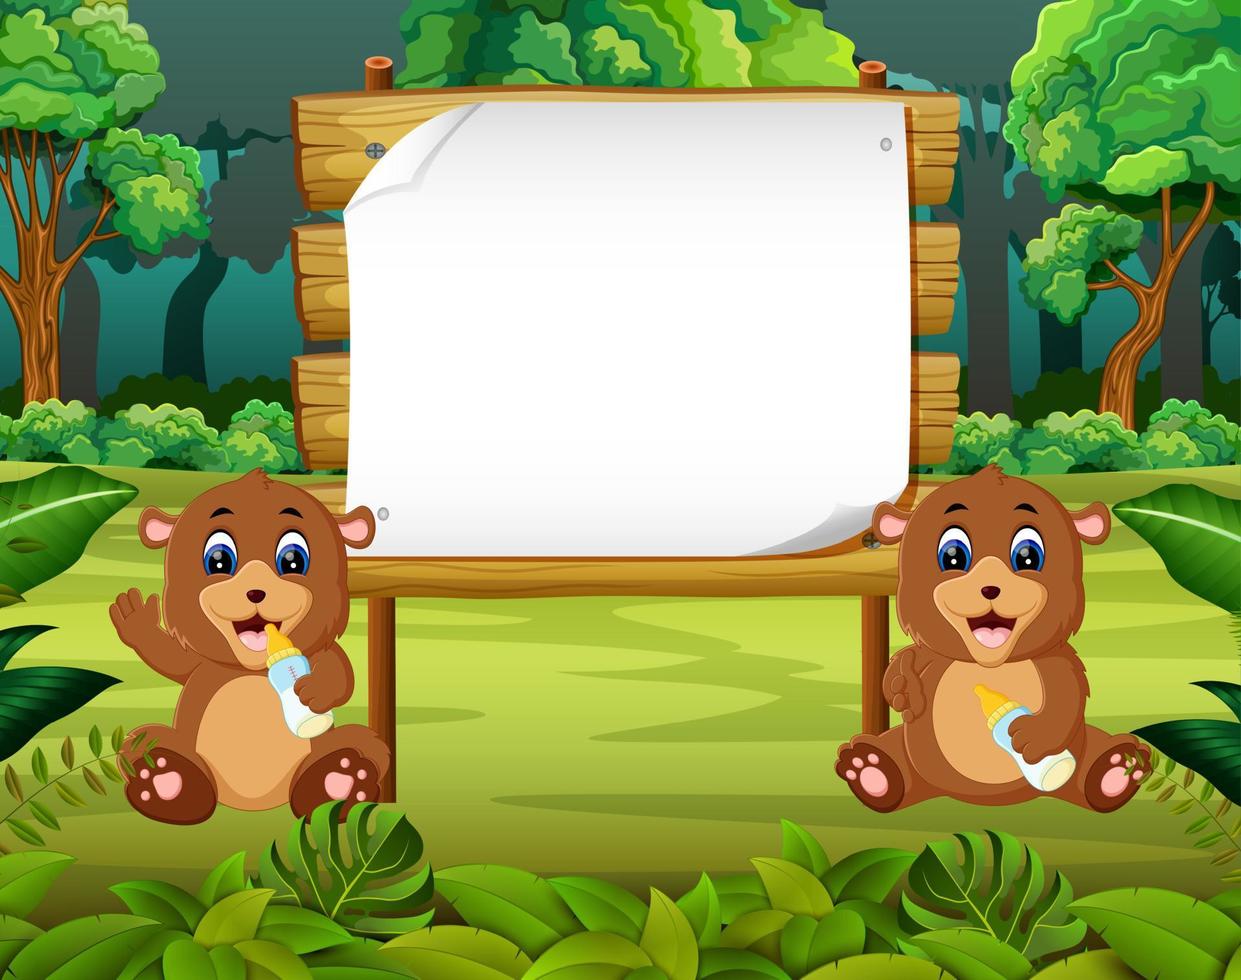 the nature view with the wooden board blank space and two little baby bear vector